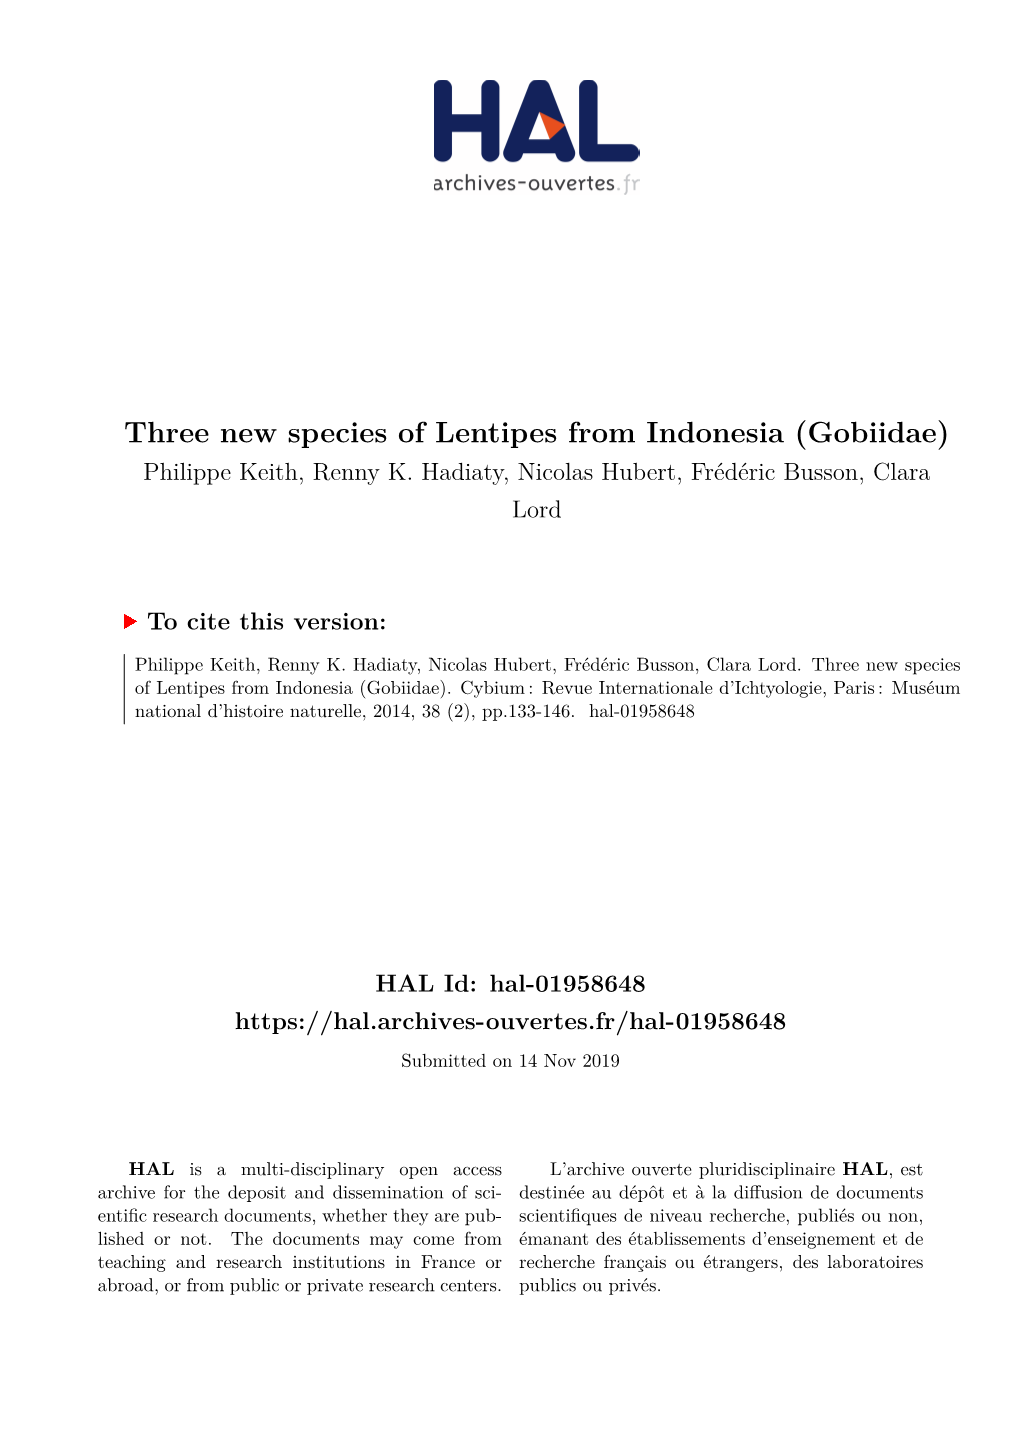 Three New Species of Lentipes from Indonesia (Gobiidae) Philippe Keith, Renny K